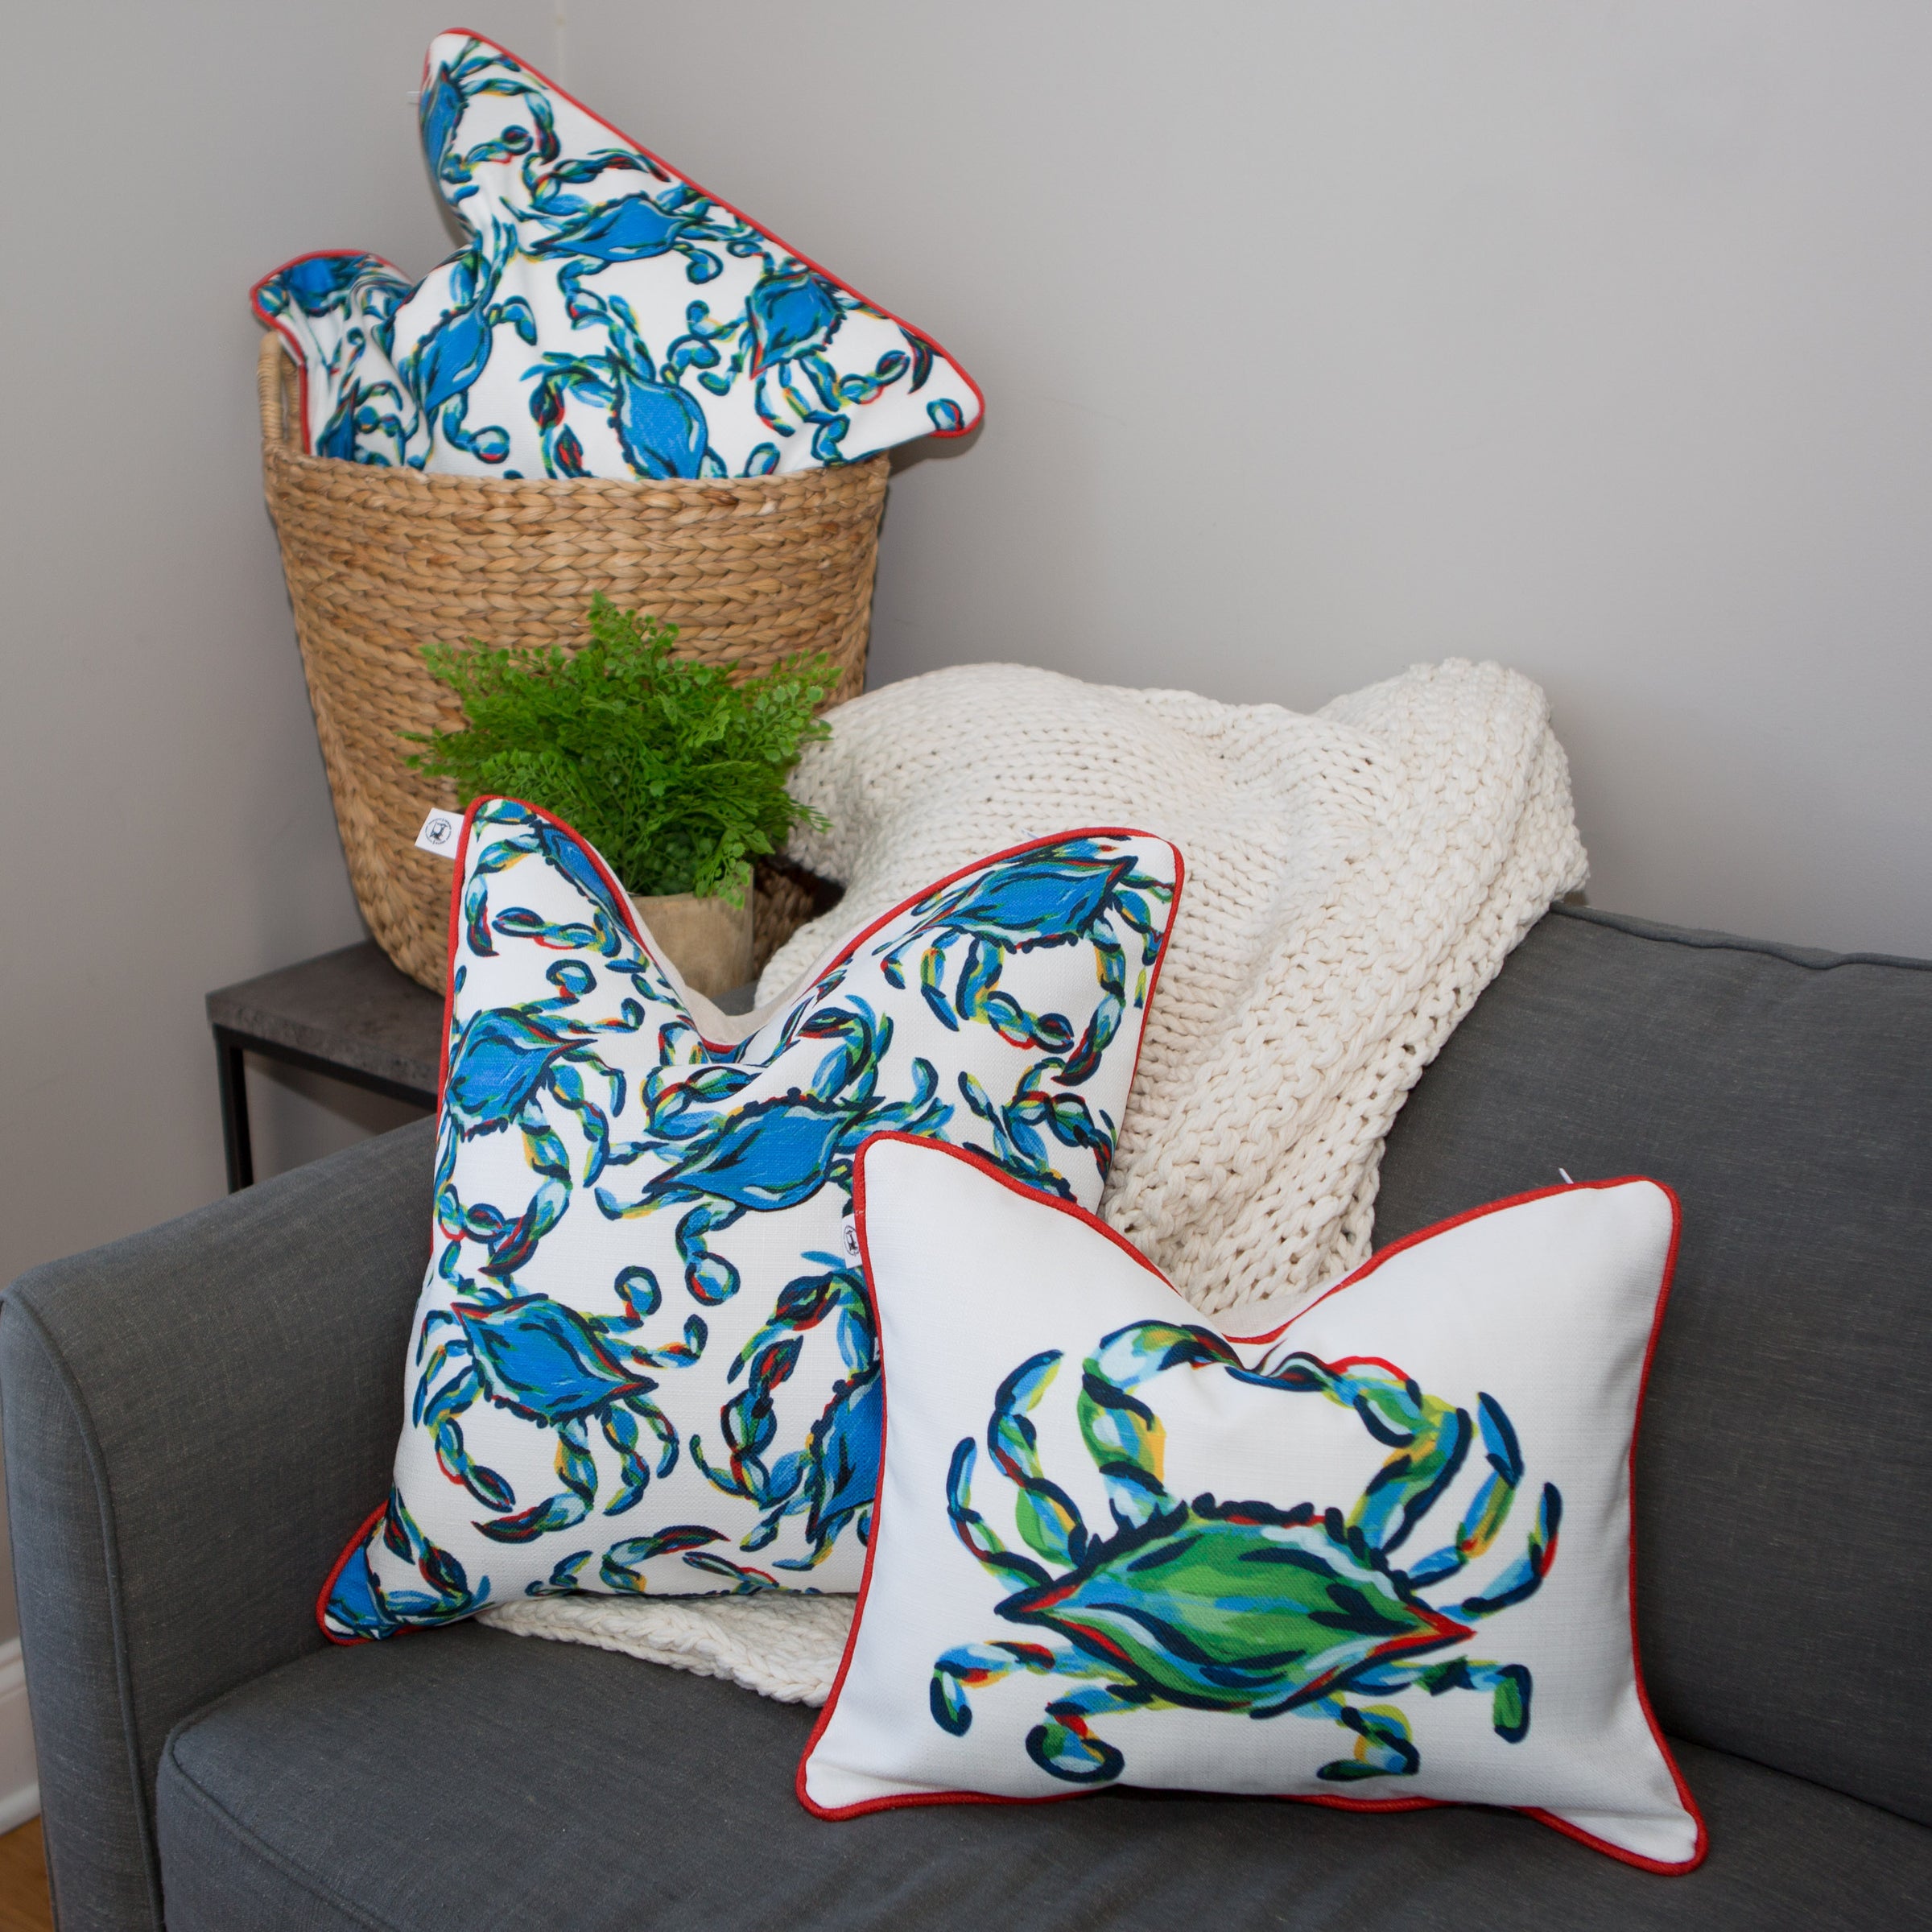 Blue Crab Chain Stitch Decorative Throw Pillow 18x18 (Insert Included)